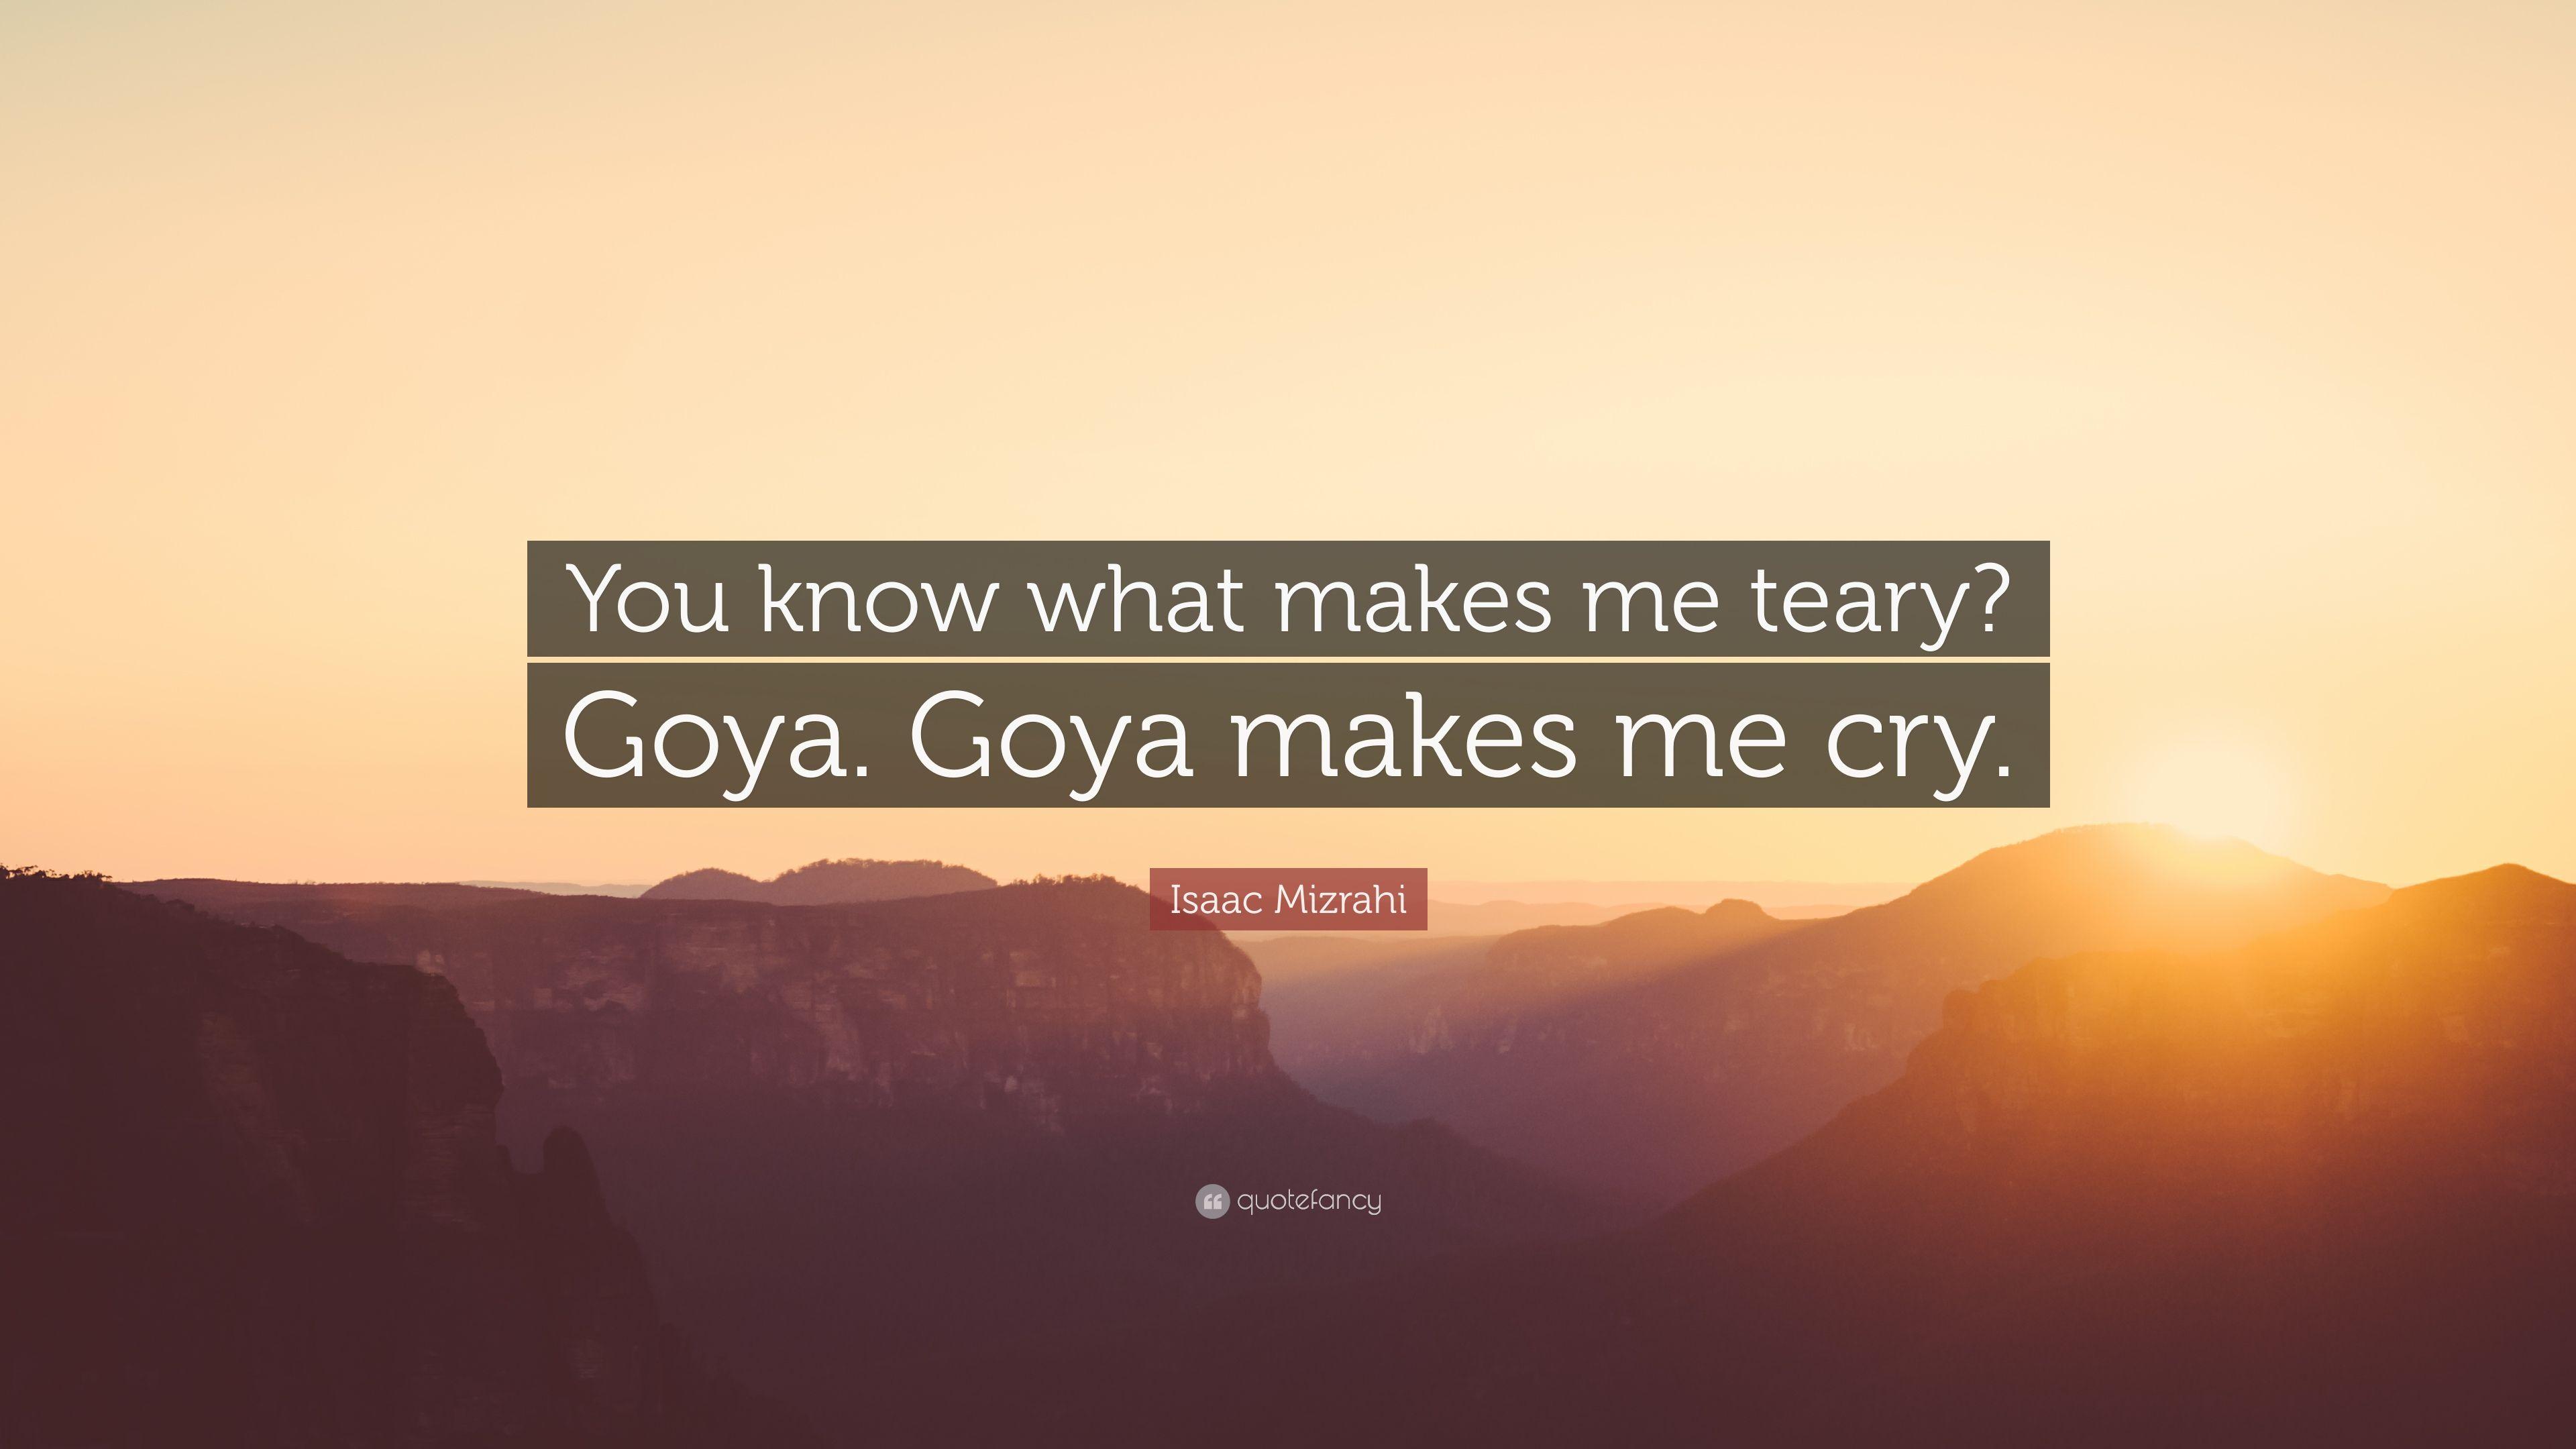 Isaac Mizrahi Quote: “You know what makes me teary? Goya. Goya